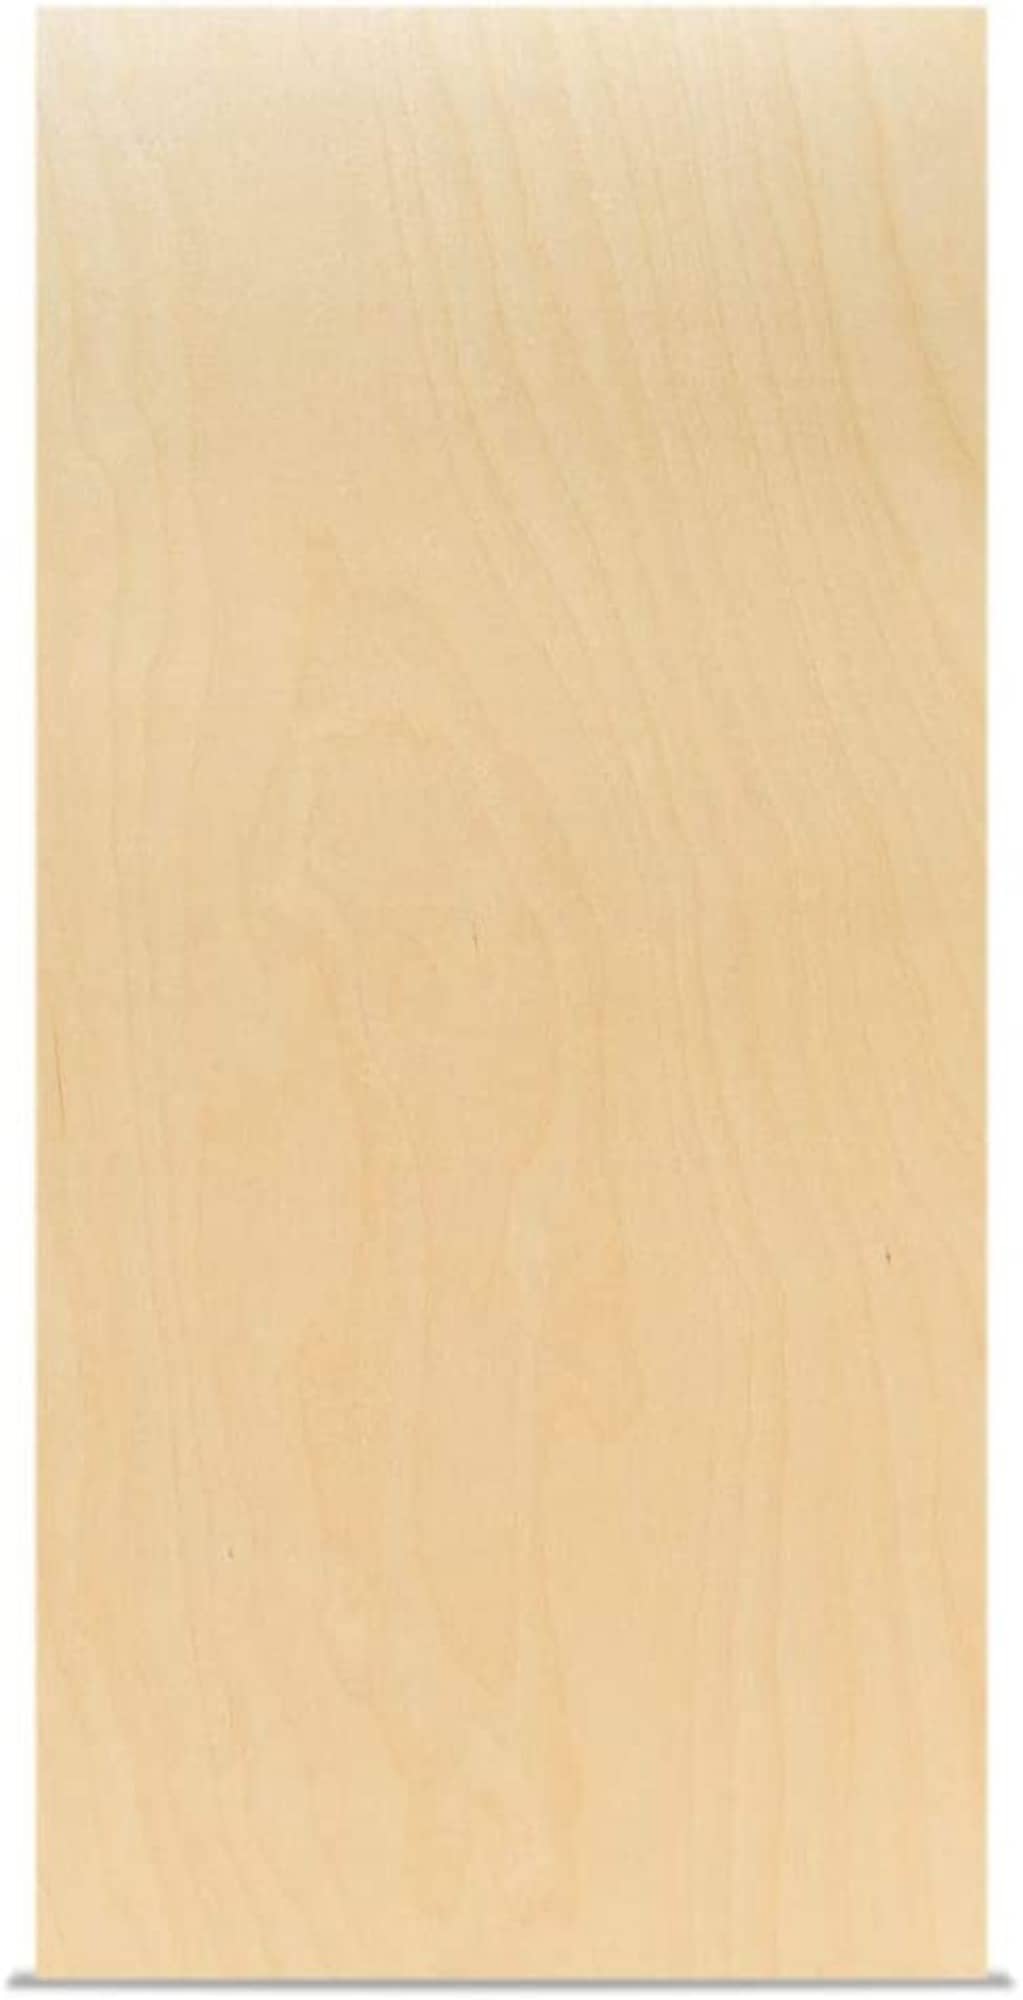 45pcs Baltic Birch Plywood 1/8''(3mm) Thick 12 X 12 Wood Crafts Modeling